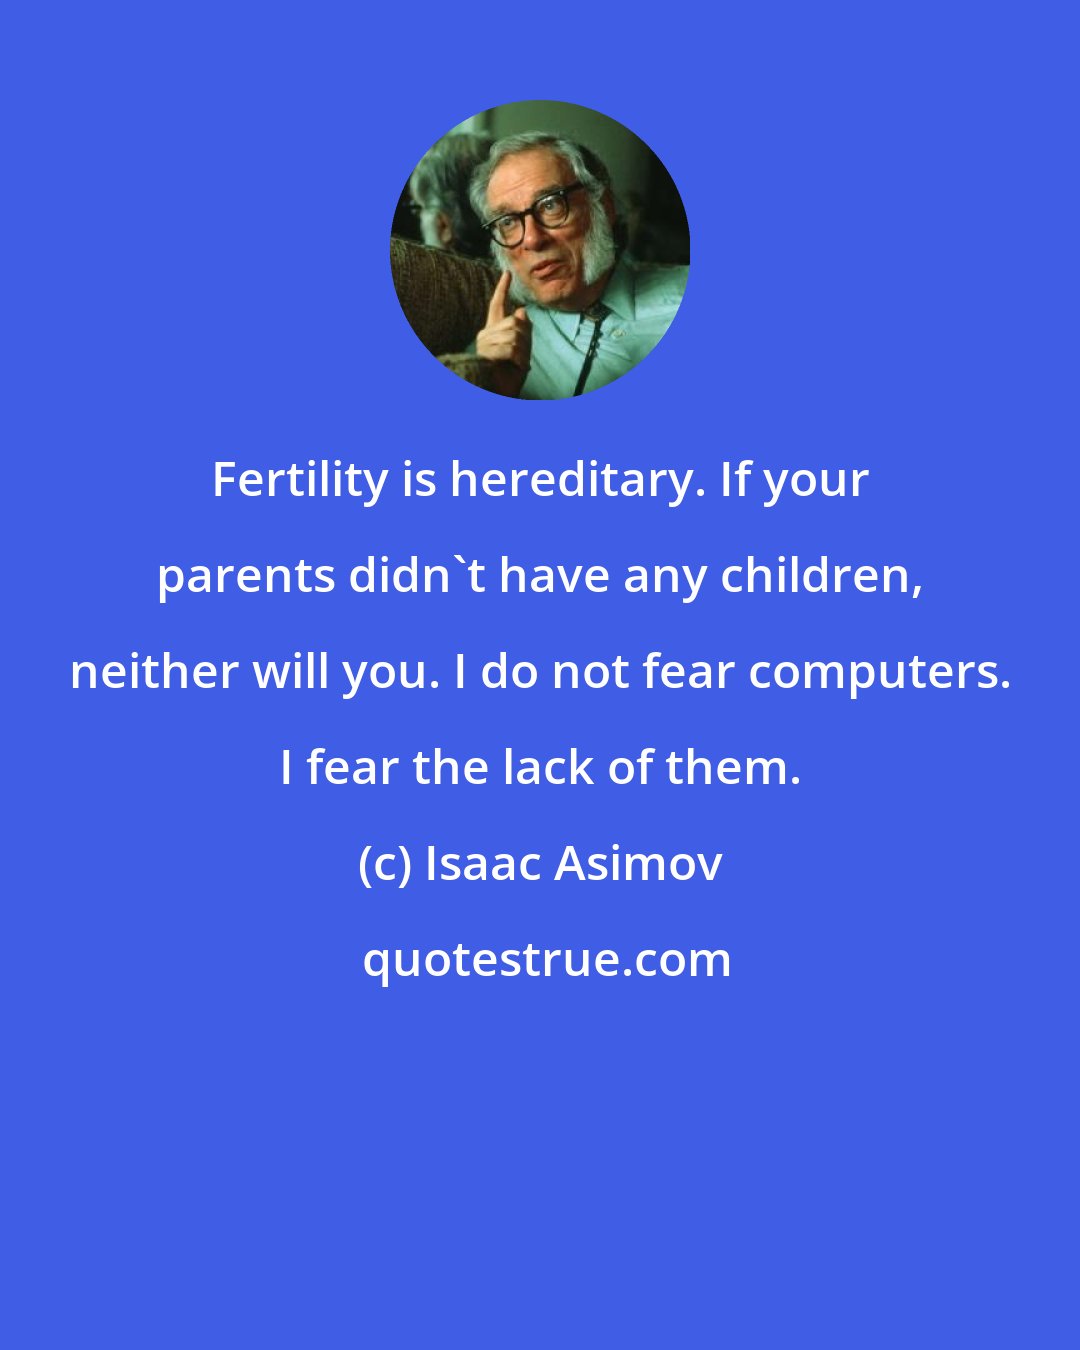 Isaac Asimov: Fertility is hereditary. If your parents didn't have any children, neither will you. I do not fear computers. I fear the lack of them.